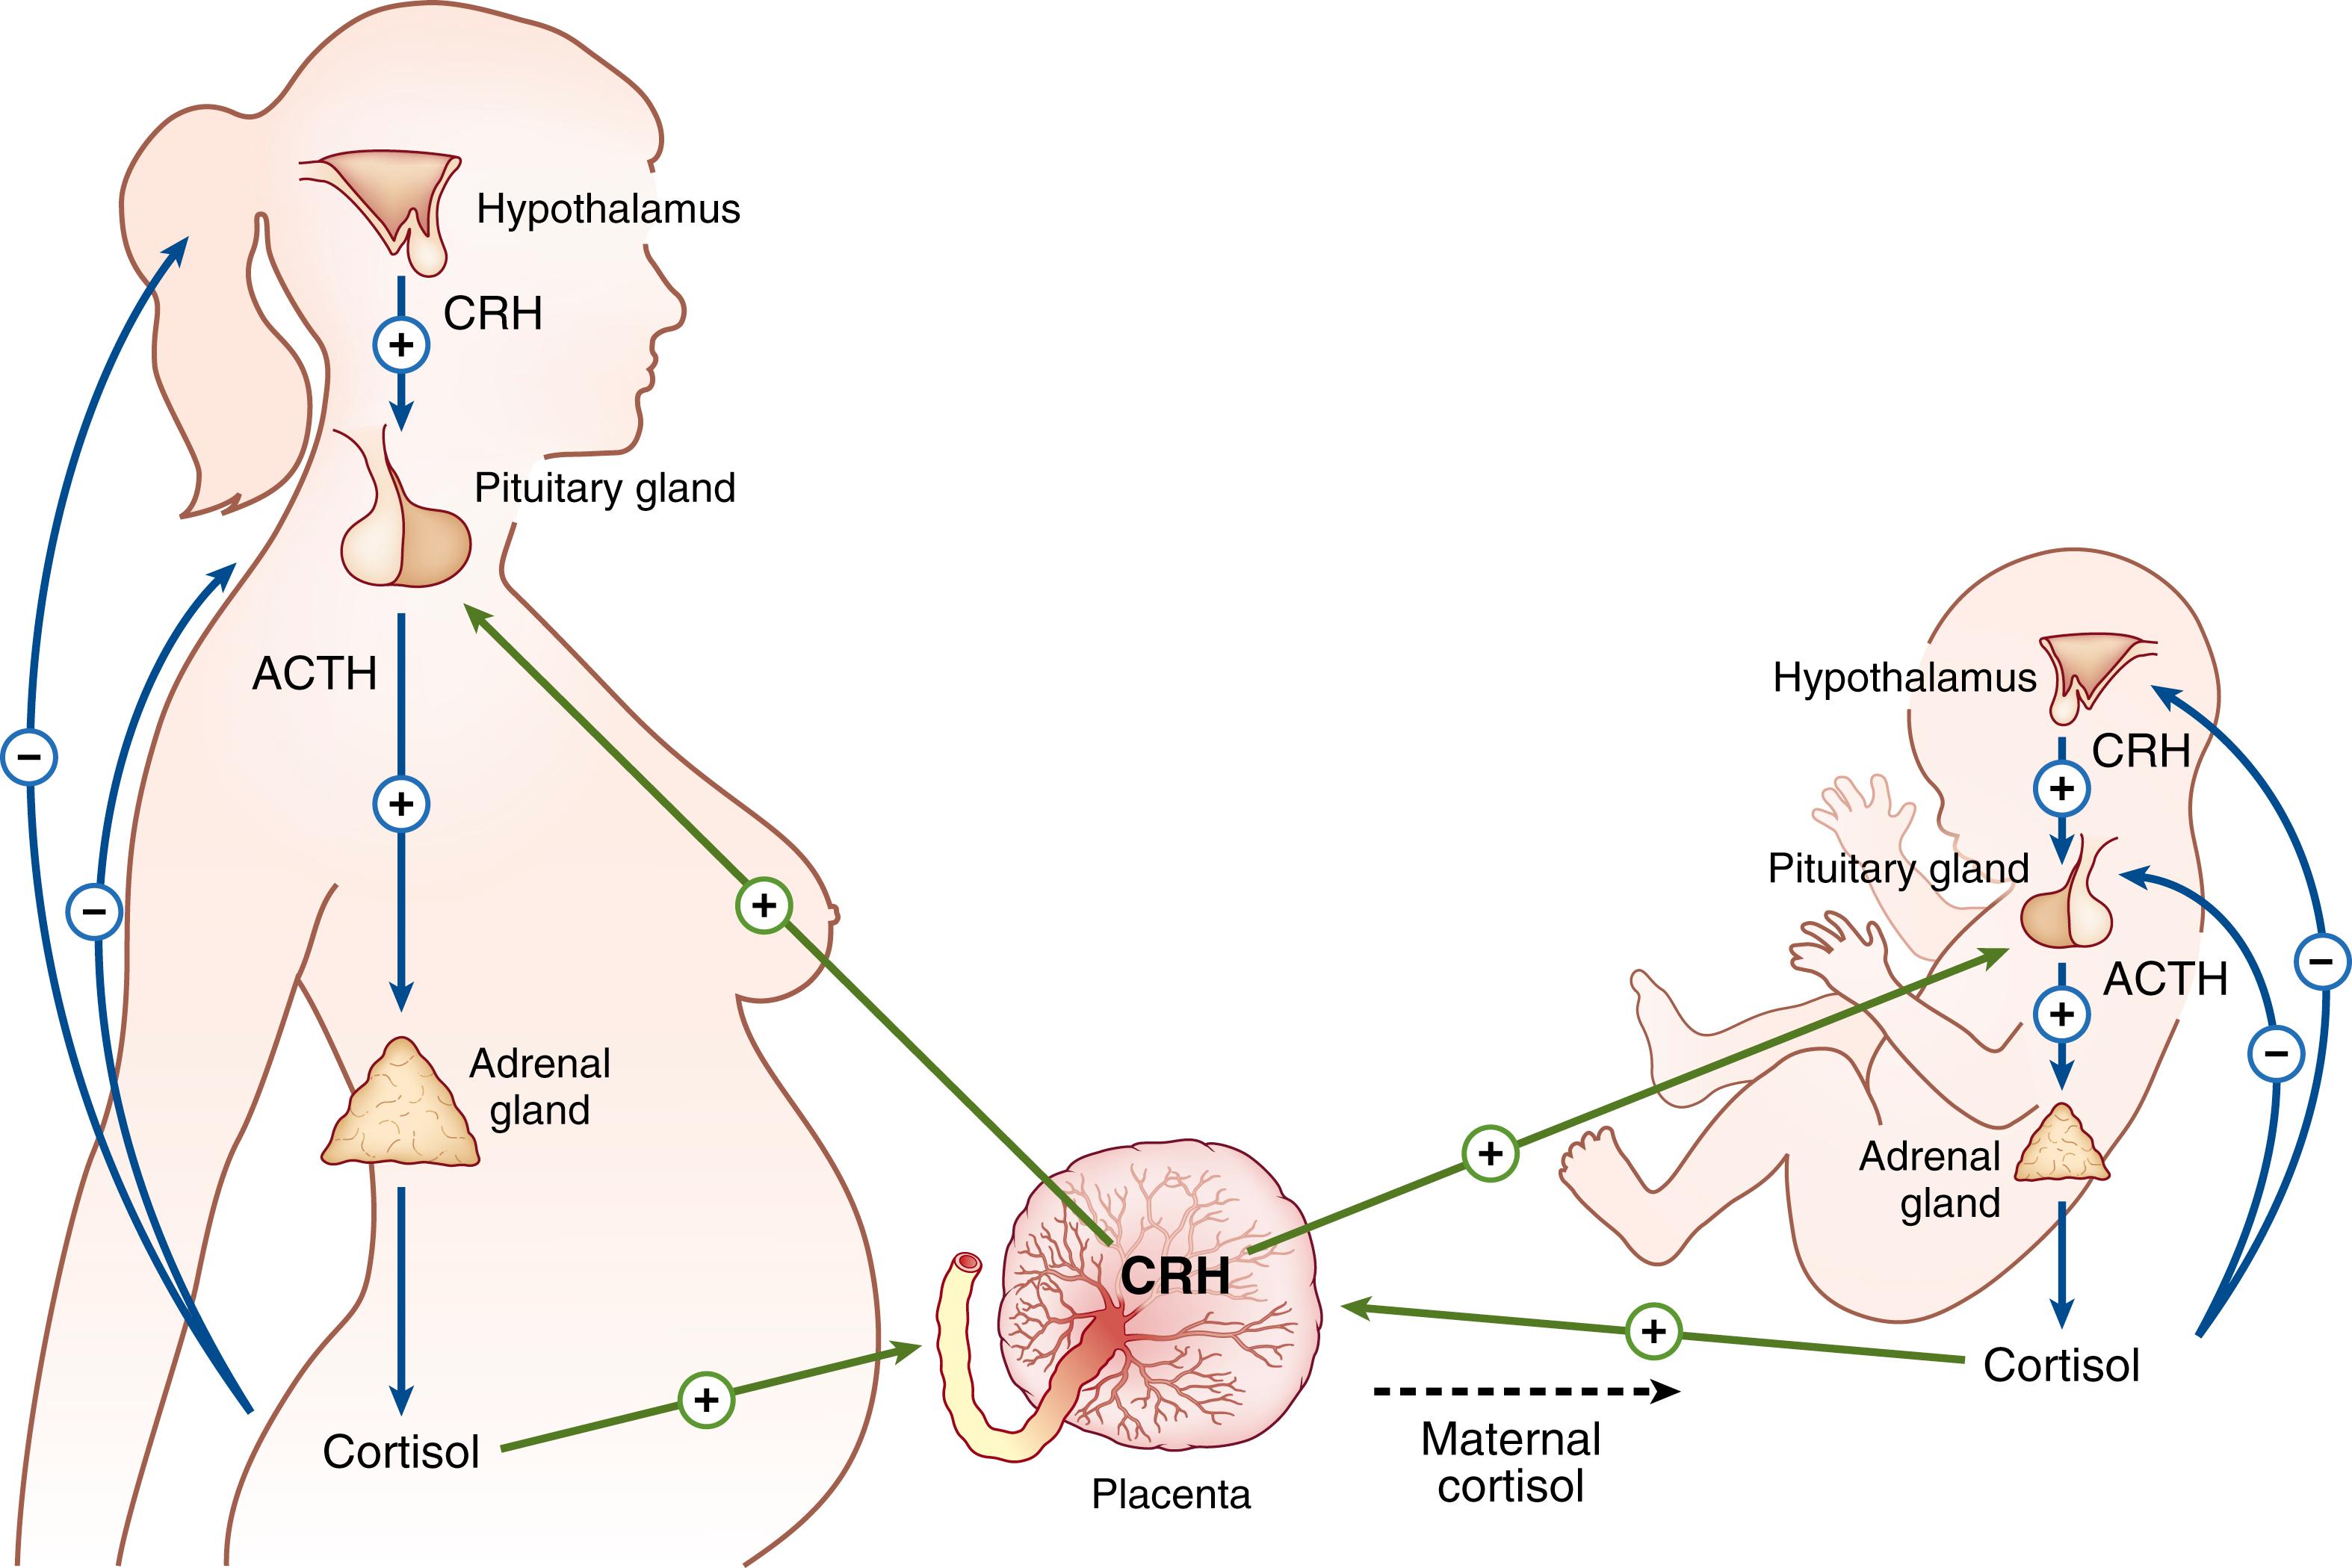 Fig. 143.1, Influence of placental corticotropin-releasing hormone (CRH) on both the maternal and fetal hypothalamus-pituitary-adrenal axes. ACTH , Adrenocorticotropic hormone.